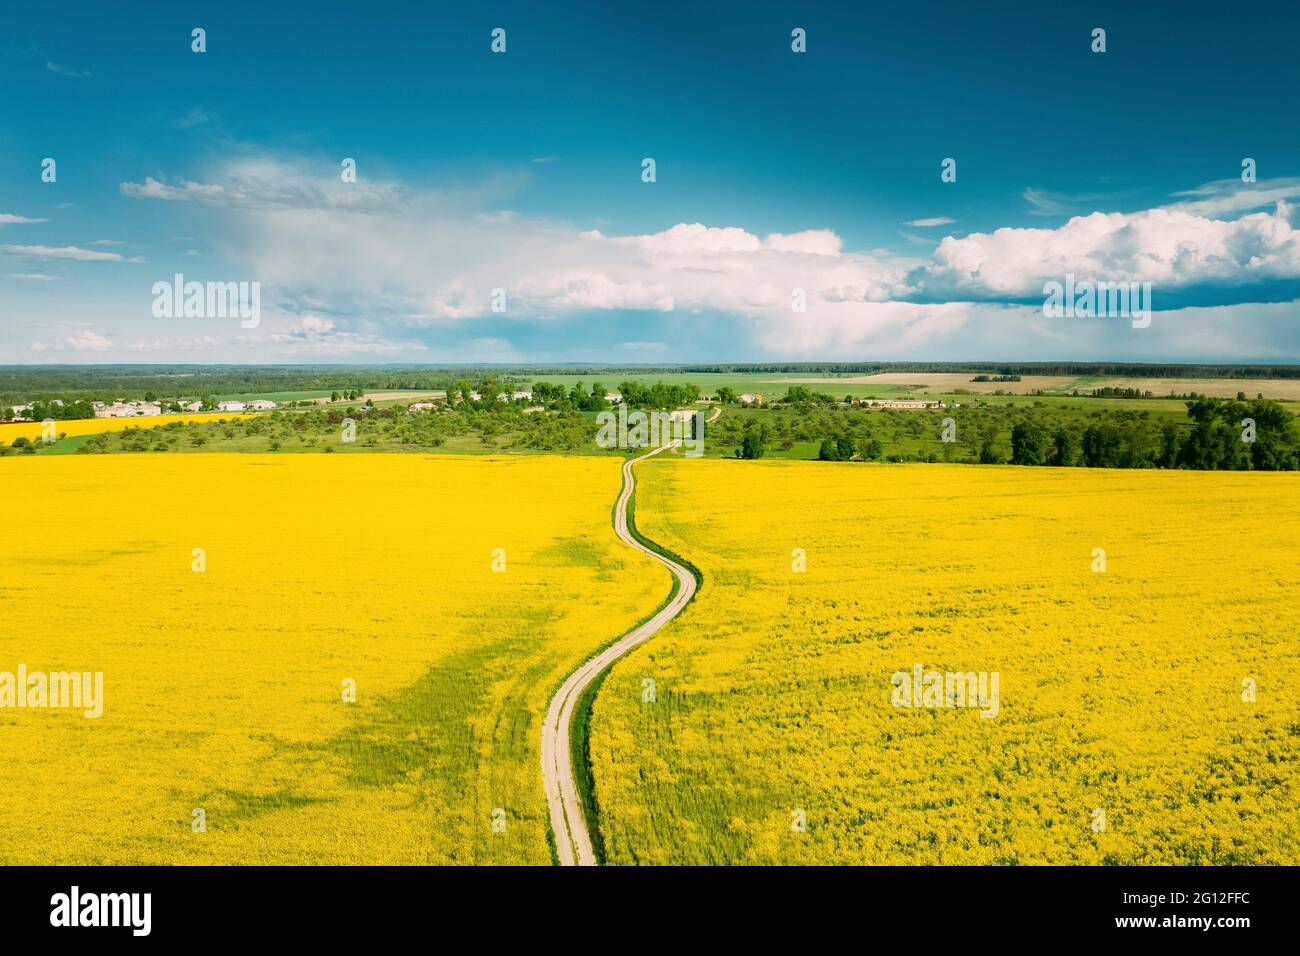 Aerial View Of Agricultural Landscape With Flowering Blooming Rapeseed, Oilseed In Field In Spring Season. Blossom Of Canola Yellow Flowers. Stock Photo